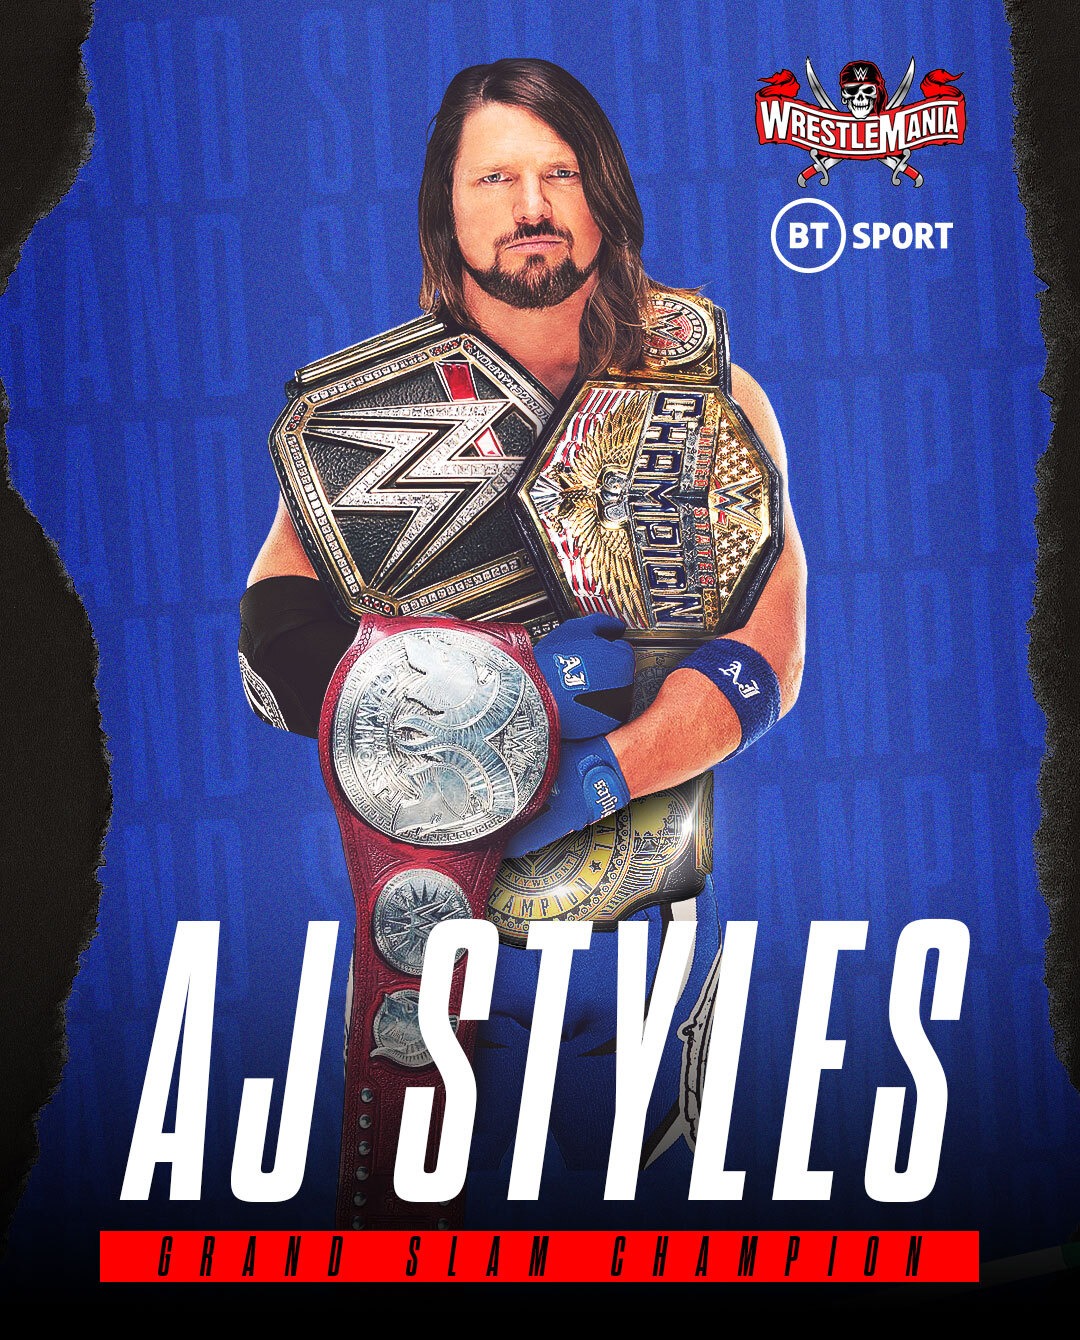 WWE on BT Sport on Twitter: "And with that win @AJStylesOrg completes the set WWE 🏆 𝐆𝐫𝐚𝐧𝐝 𝐒𝐥𝐚𝐦 𝐂𝐡𝐚𝐦𝐩𝐢𝐨𝐧 A stellar career. An all-time great 🐐 #WrestleMania https://t.co/FBPSa7XliL" /